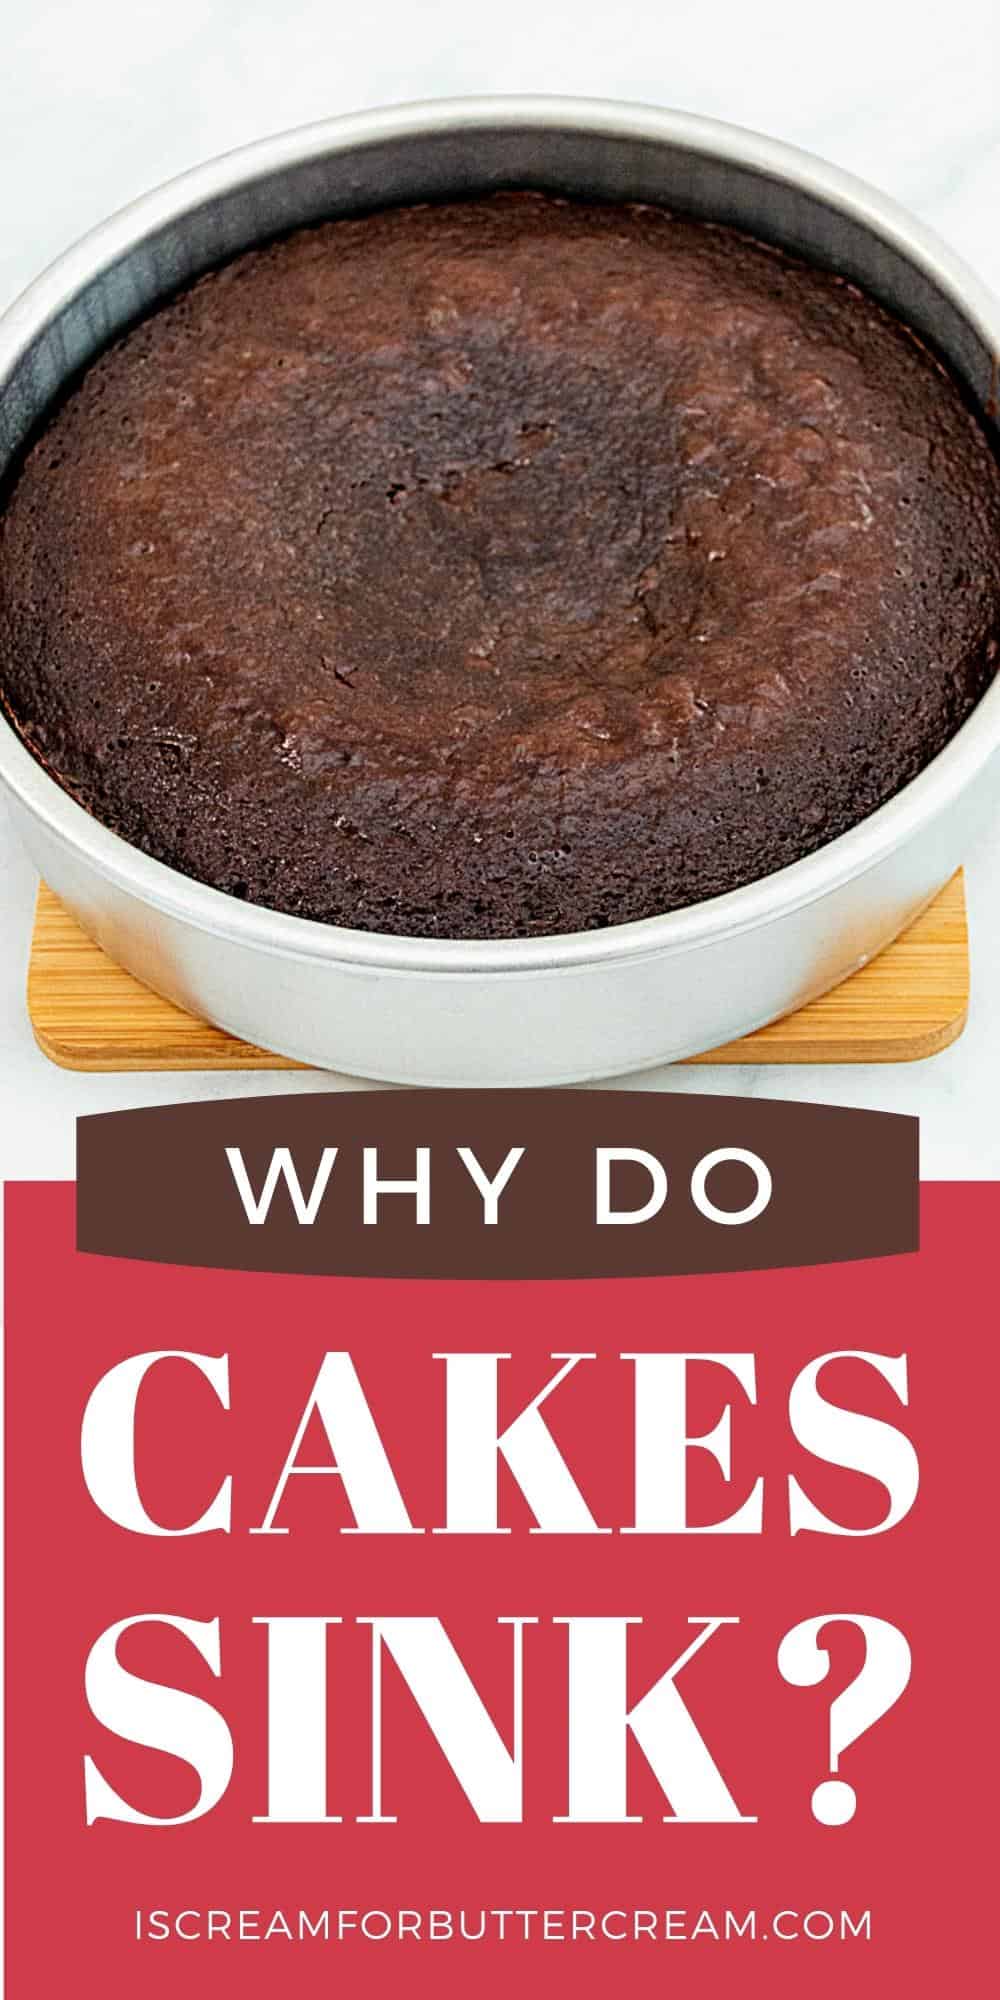 Top cake layer in a pan with text overlay.